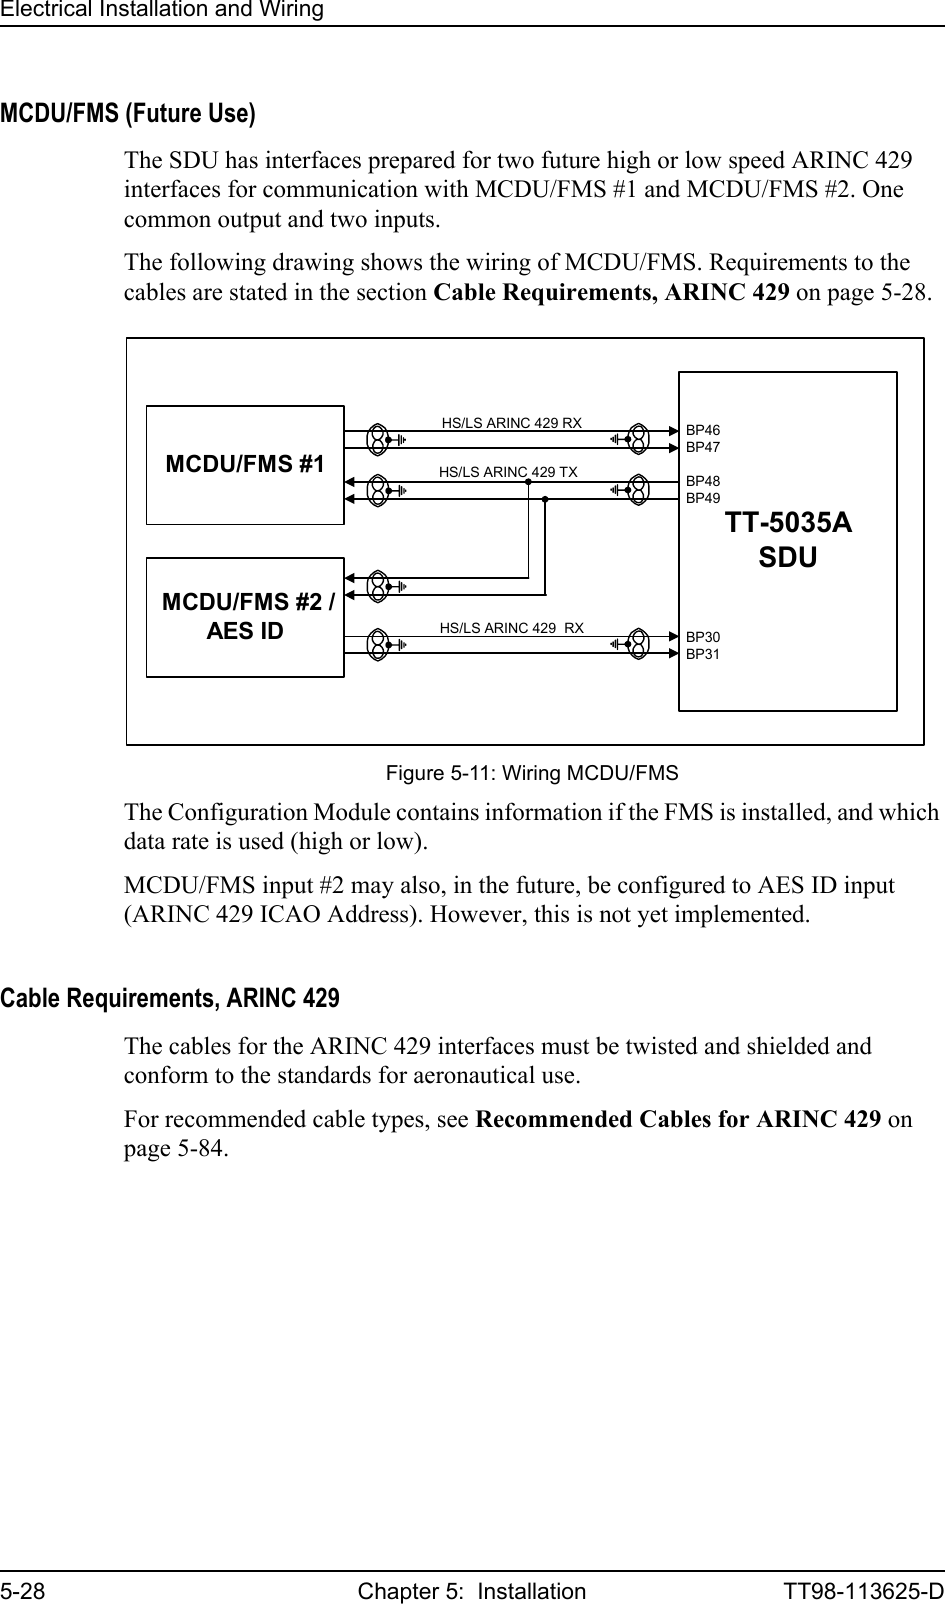 Electrical Installation and Wiring5-28 Chapter 5:  Installation TT98-113625-DMCDU/FMS (Future Use)The SDU has interfaces prepared for two future high or low speed ARINC 429 interfaces for communication with MCDU/FMS #1 and MCDU/FMS #2. One common output and two inputs. The following drawing shows the wiring of MCDU/FMS. Requirements to the cables are stated in the section Cable Requirements, ARINC 429 on page 5-28.The Configuration Module contains information if the FMS is installed, and which data rate is used (high or low). MCDU/FMS input #2 may also, in the future, be configured to AES ID input (ARINC 429 ICAO Address). However, this is not yet implemented.Cable Requirements, ARINC 429The cables for the ARINC 429 interfaces must be twisted and shielded and conform to the standards for aeronautical use.For recommended cable types, see Recommended Cables for ARINC 429 on page 5-84.Figure 5-11: Wiring MCDU/FMSTT-5035ASDUMCDU/FMS #1HS/LS ARINC 429 RX MCDU/FMS #2 /AES IDHS/LS ARINC 429  RX BP30BP31BP46BP47BP48BP49HS/LS ARINC 429 TX